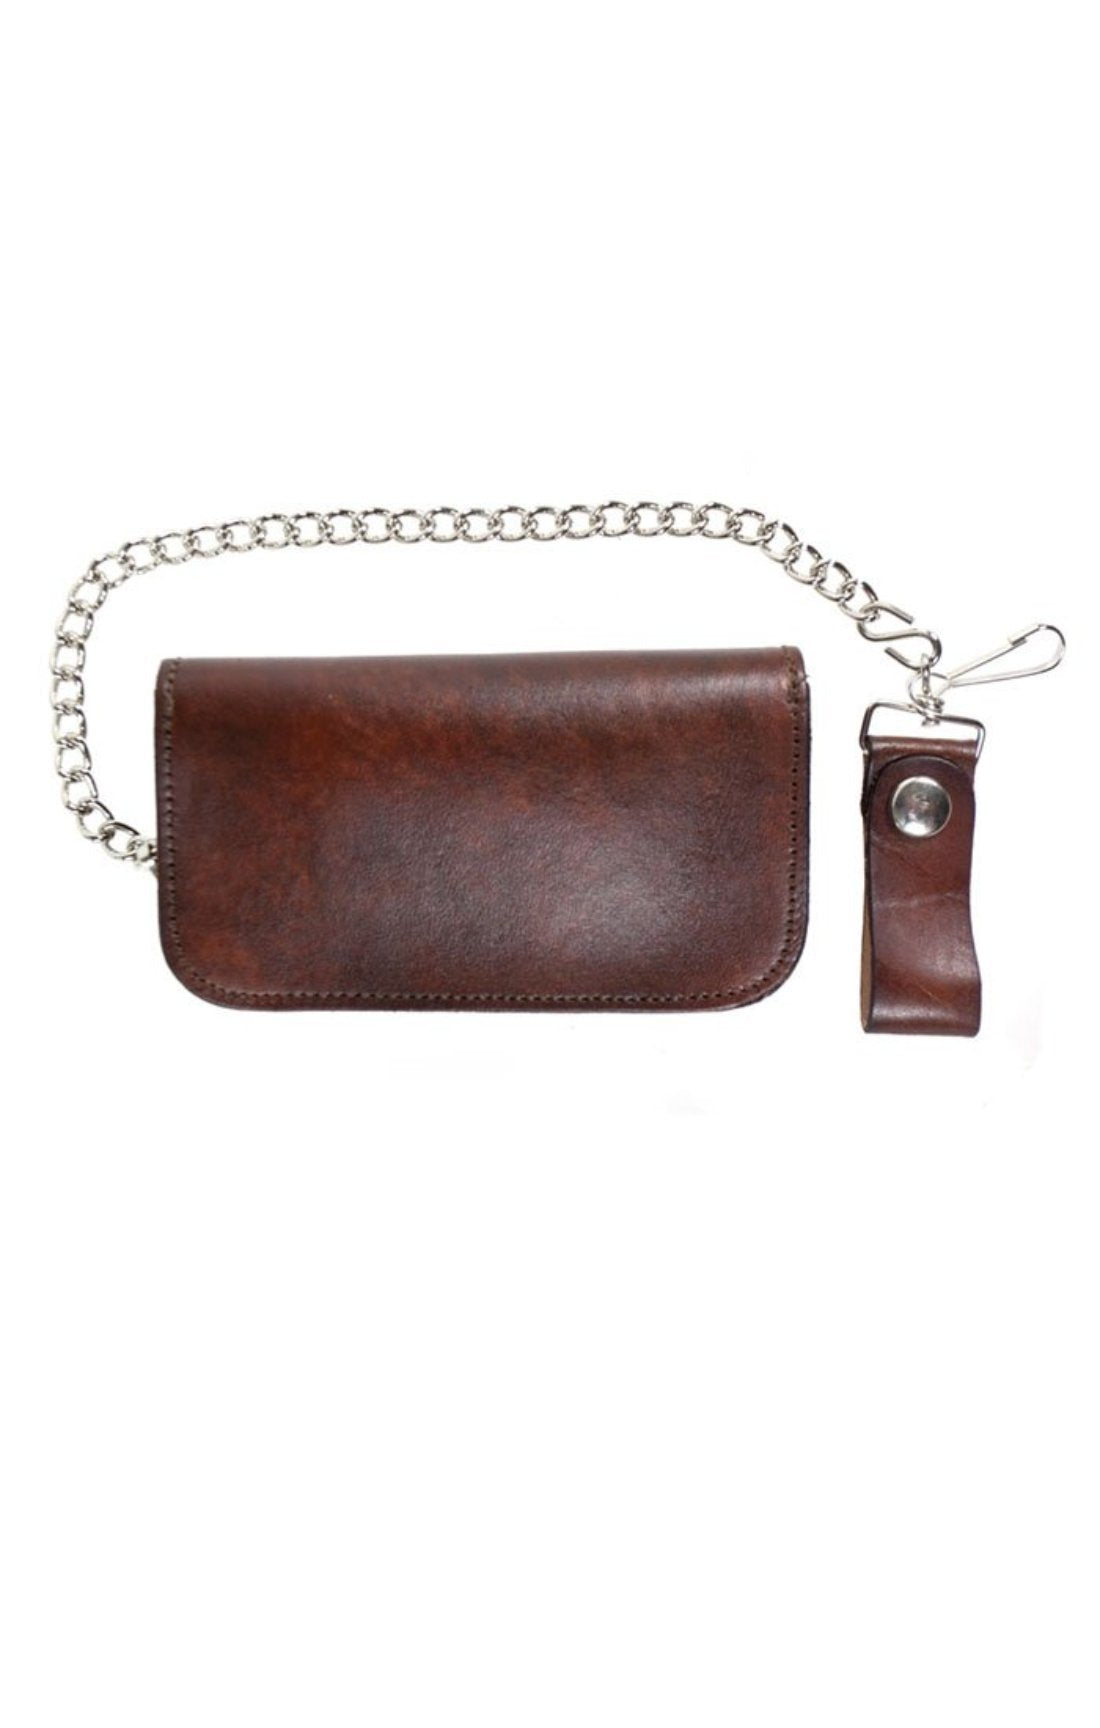 TIMELESS WALLET – Gift of Garb